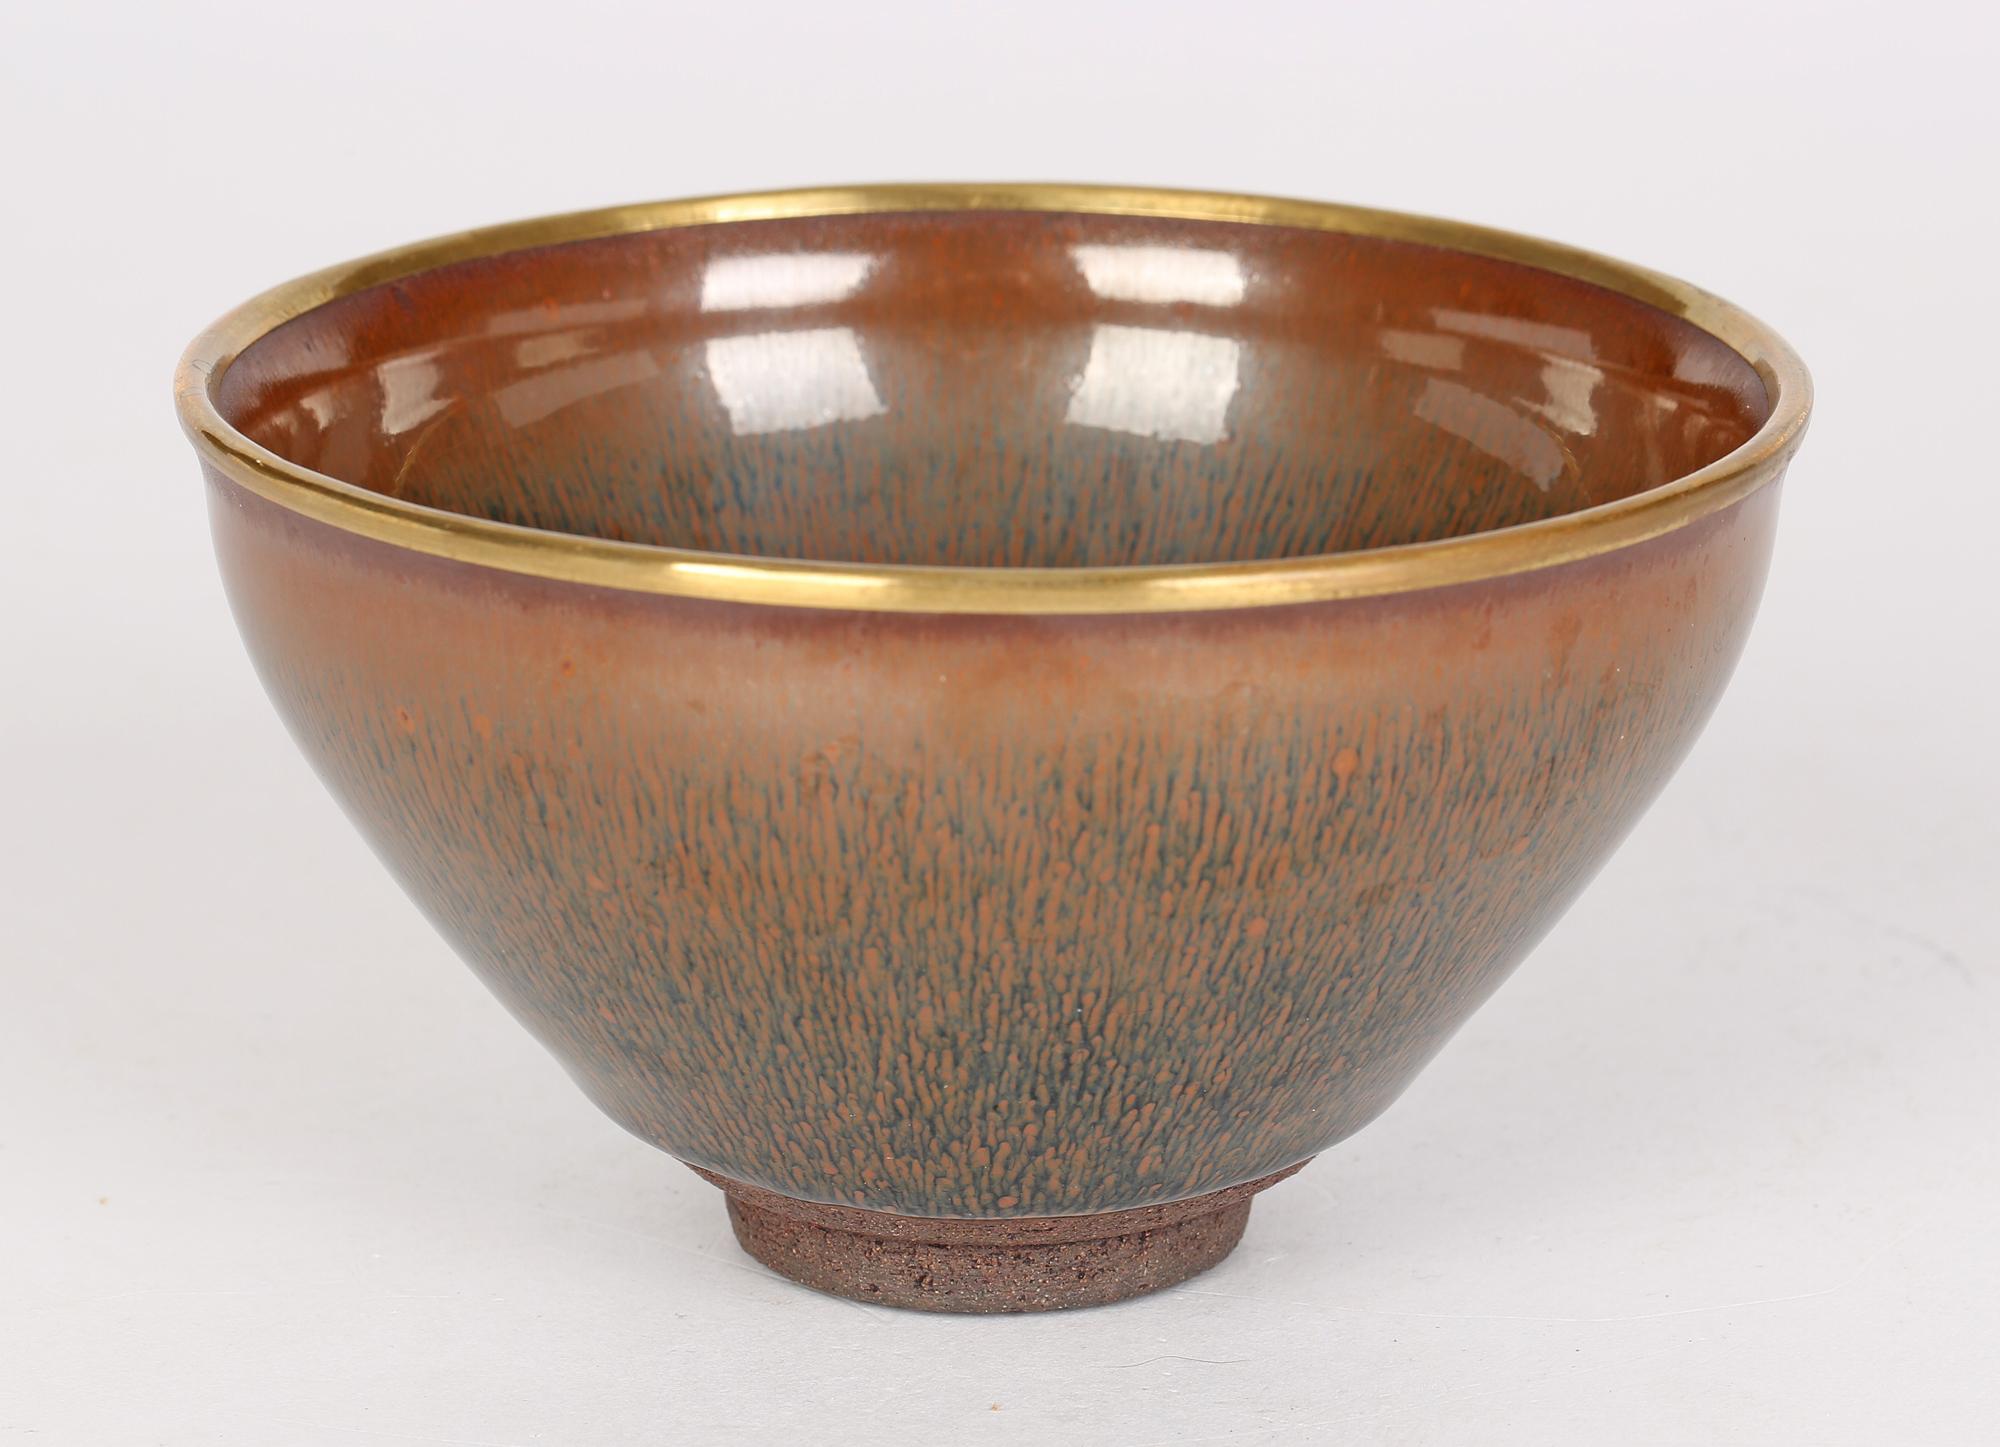 A very impressive and stylish Chinese haresfur glazed pottery tea bowl in the Jian Ware style, signed to the base, and believe to date from the 20th century. The round tea bowl stands on a narrow round unglazed foot and is finely decorated in brown